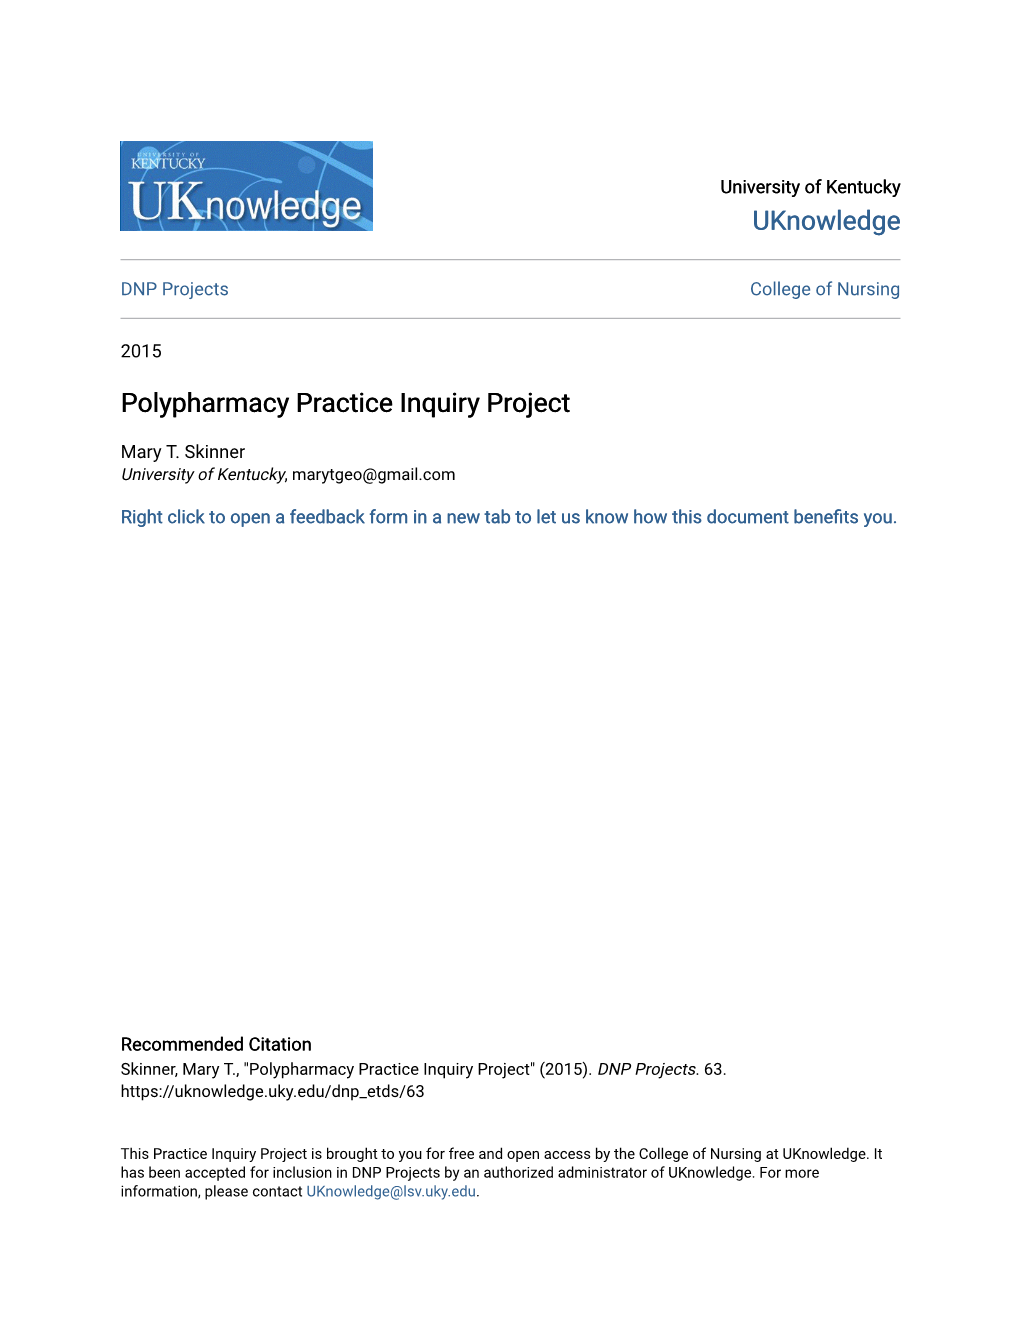 Polypharmacy Practice Inquiry Project